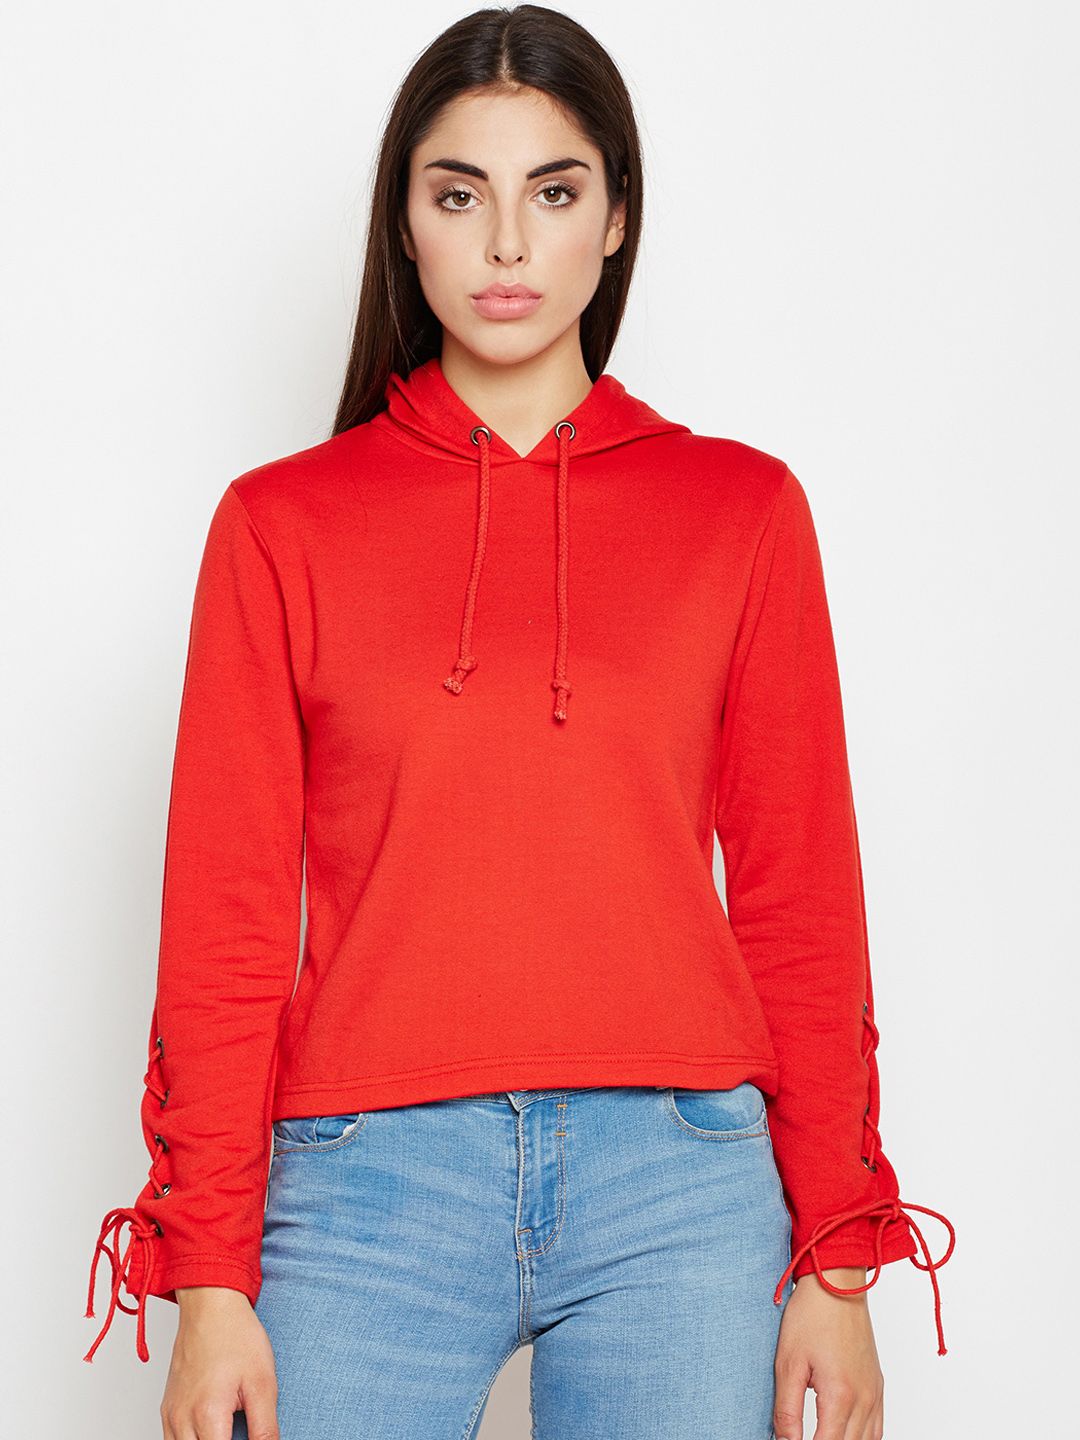 Oxolloxo Women Red Solid Hooded Sweatshirt Price in India